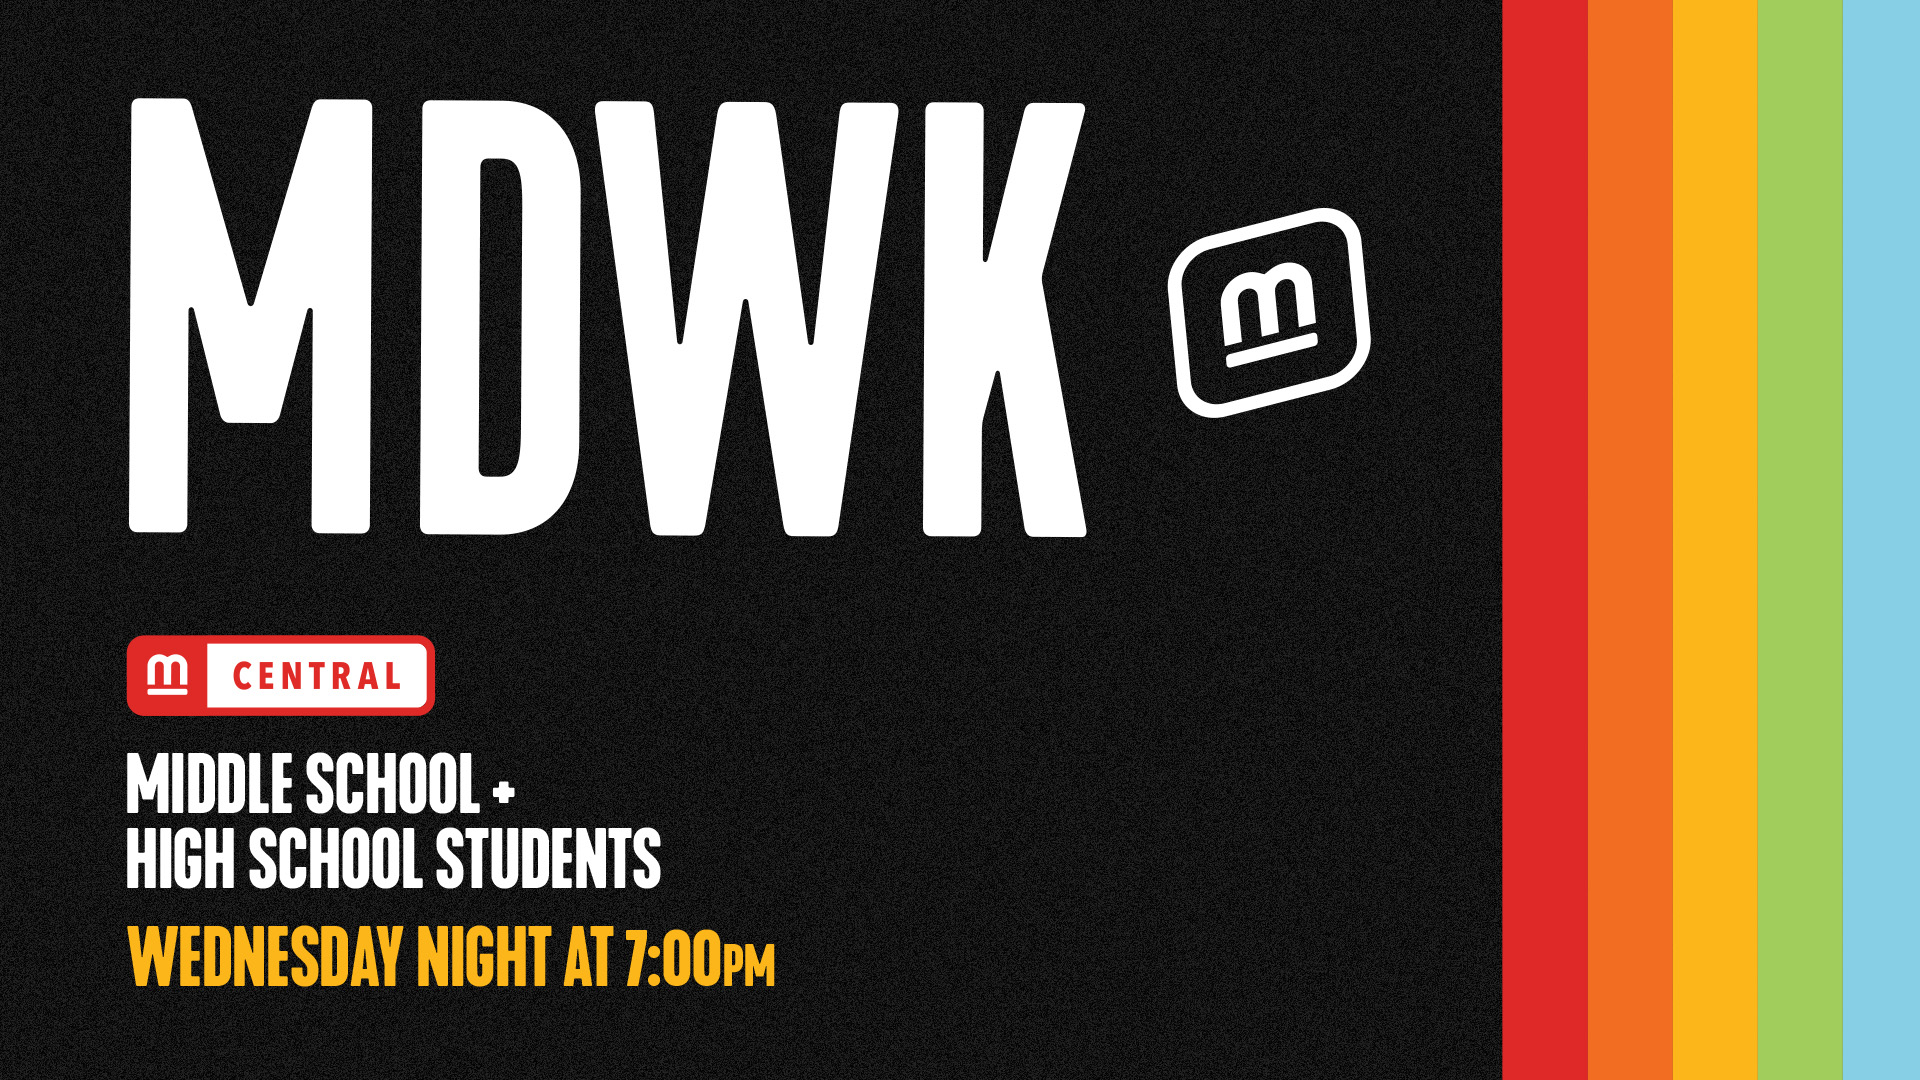 Student Midweek MDWK at Mission City Central